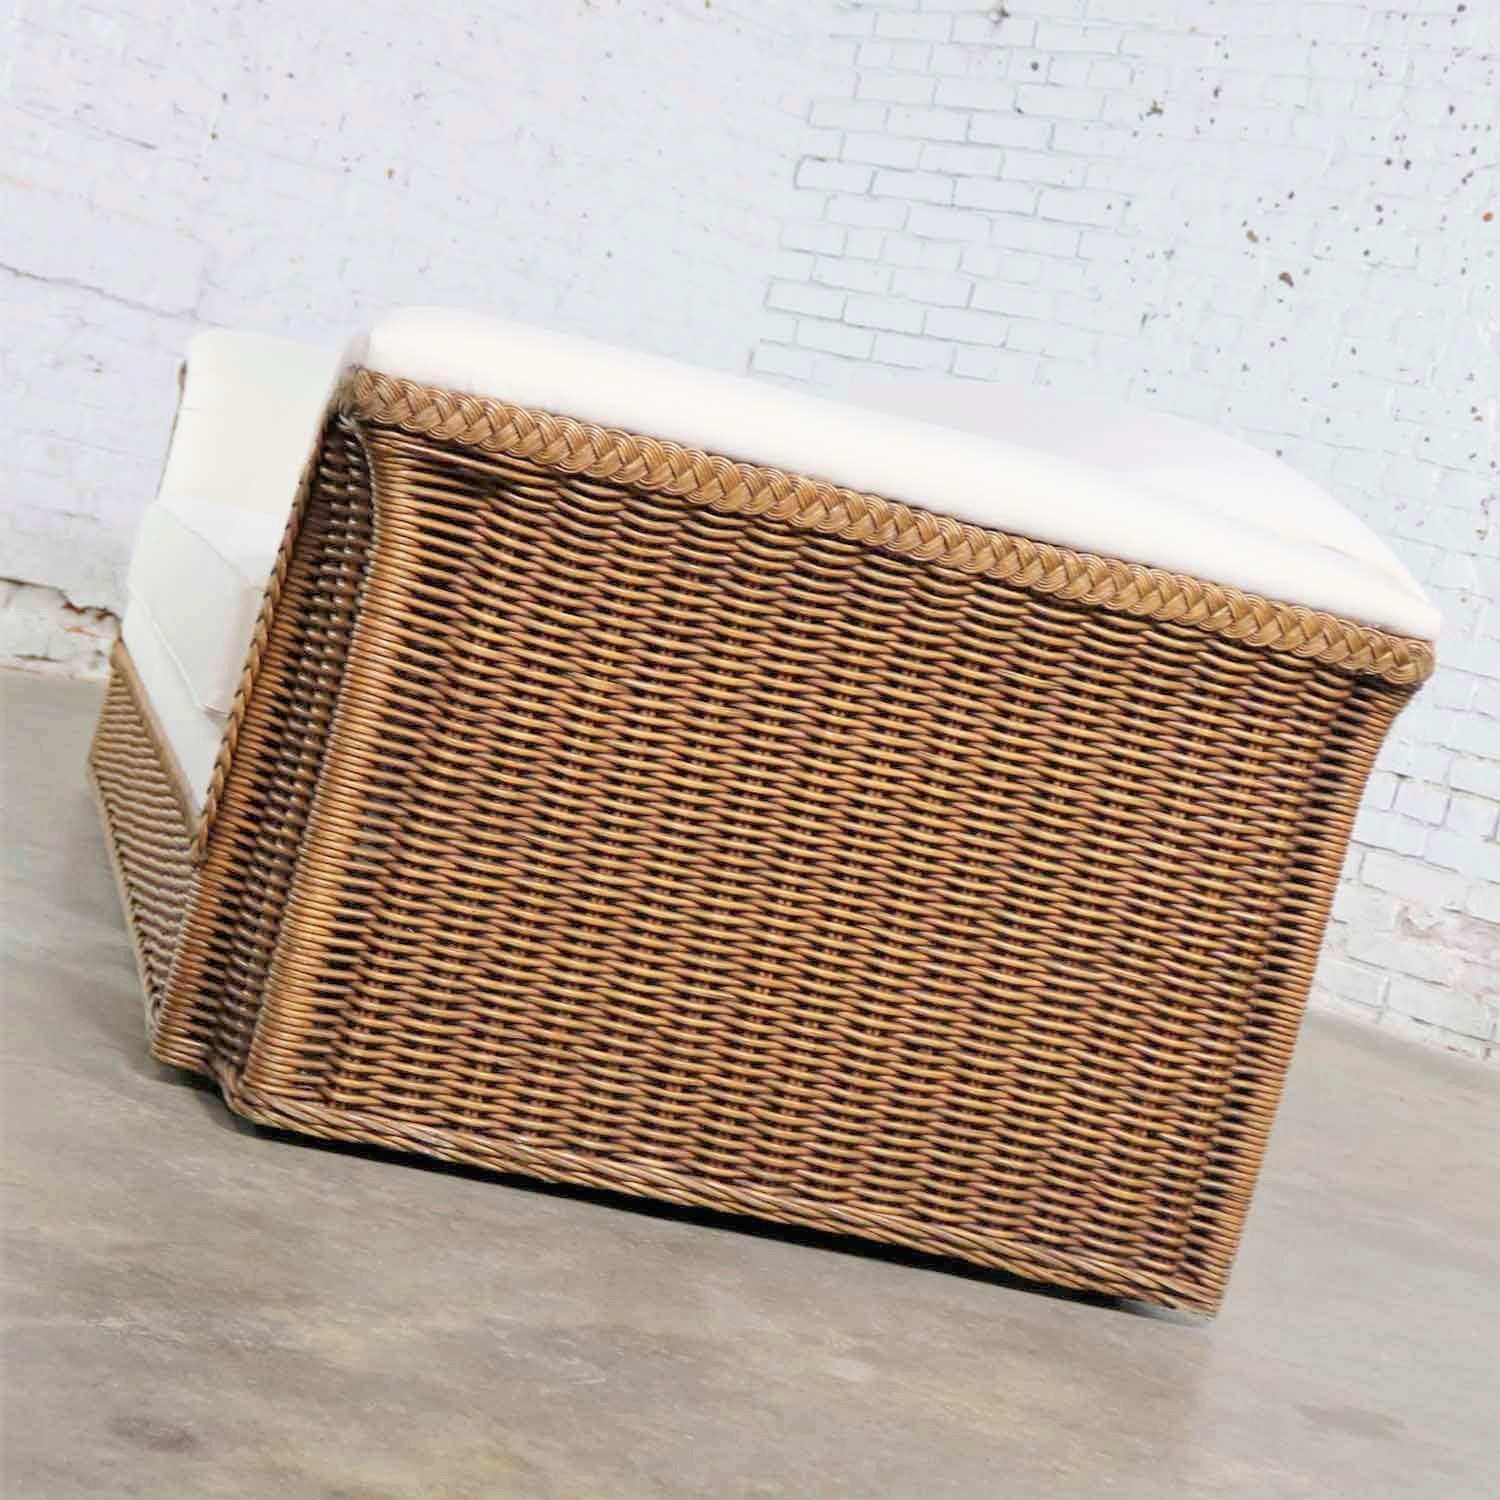 20th Century Vintage Modern Wicker Sofa Manner Michael Taylor in New White Canvas